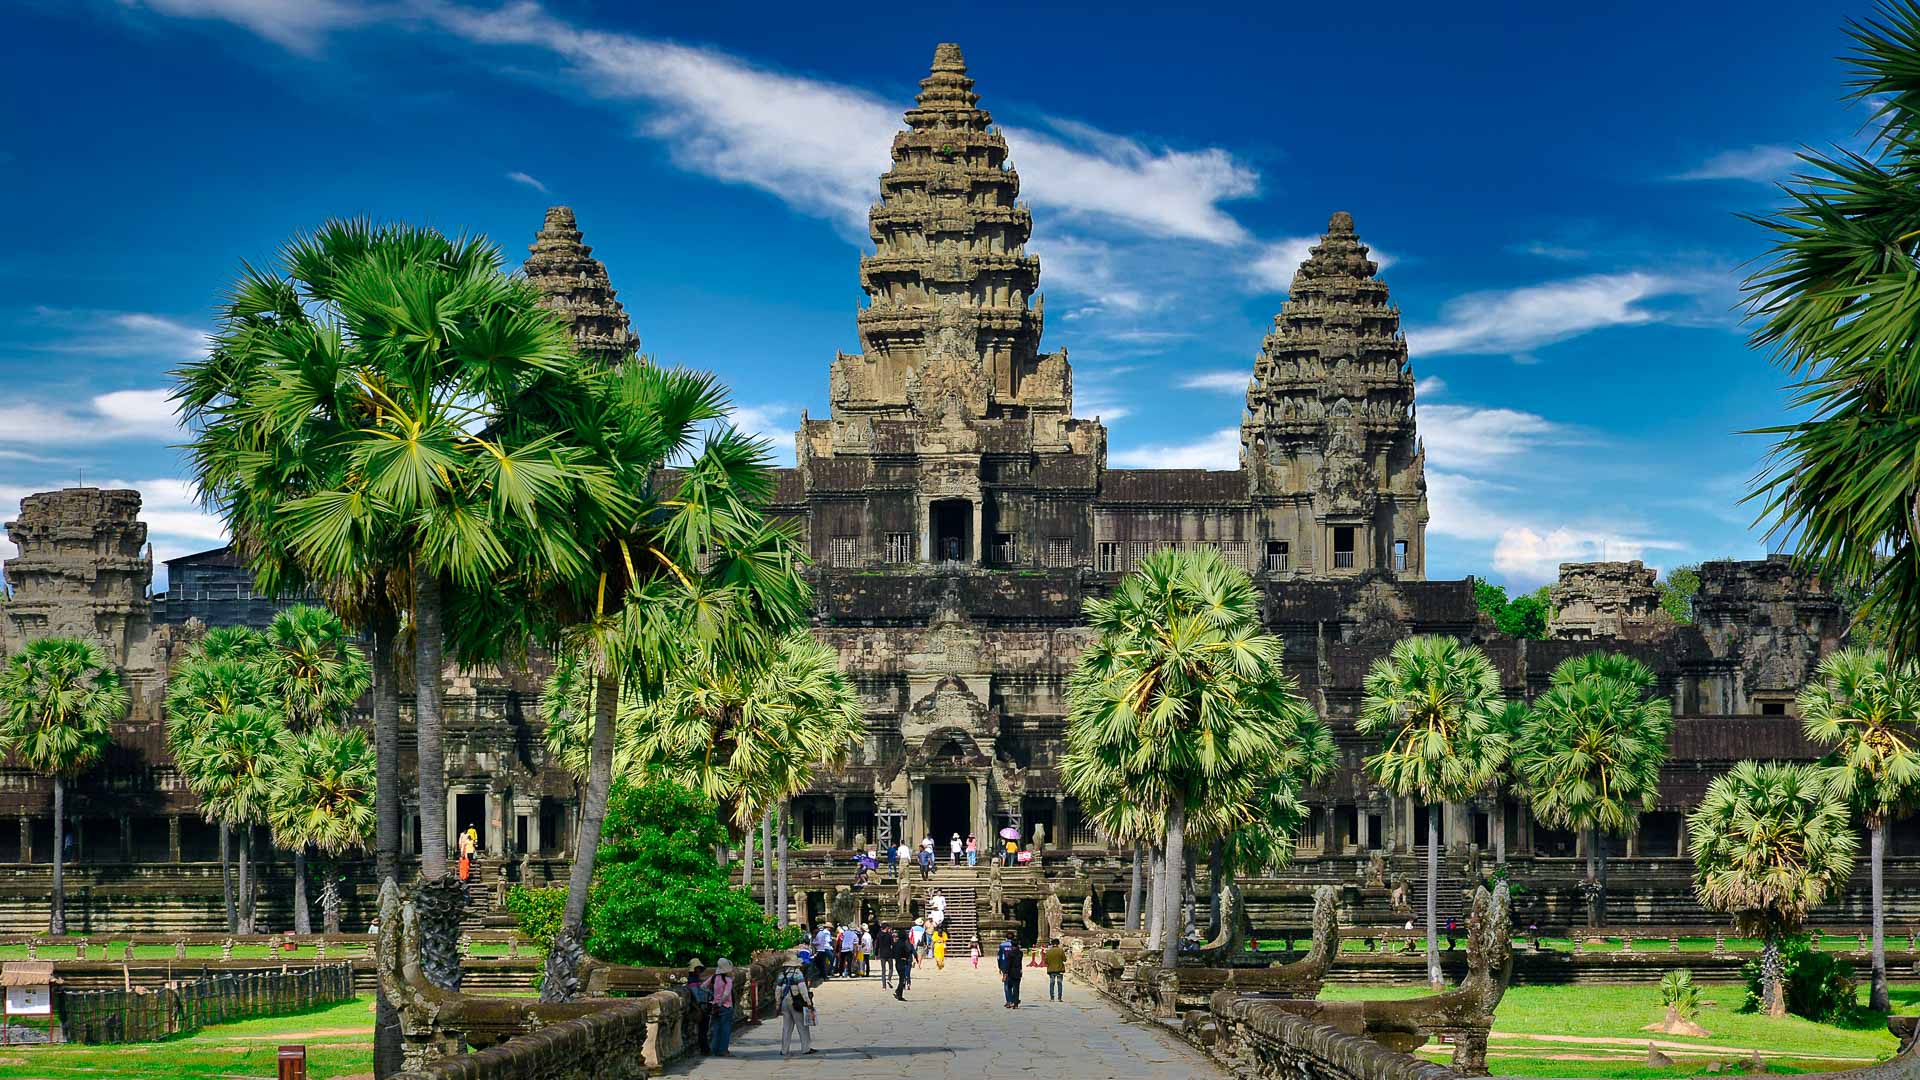 A group tour is entering Angkor Wat in Siem Reap, Cambodia